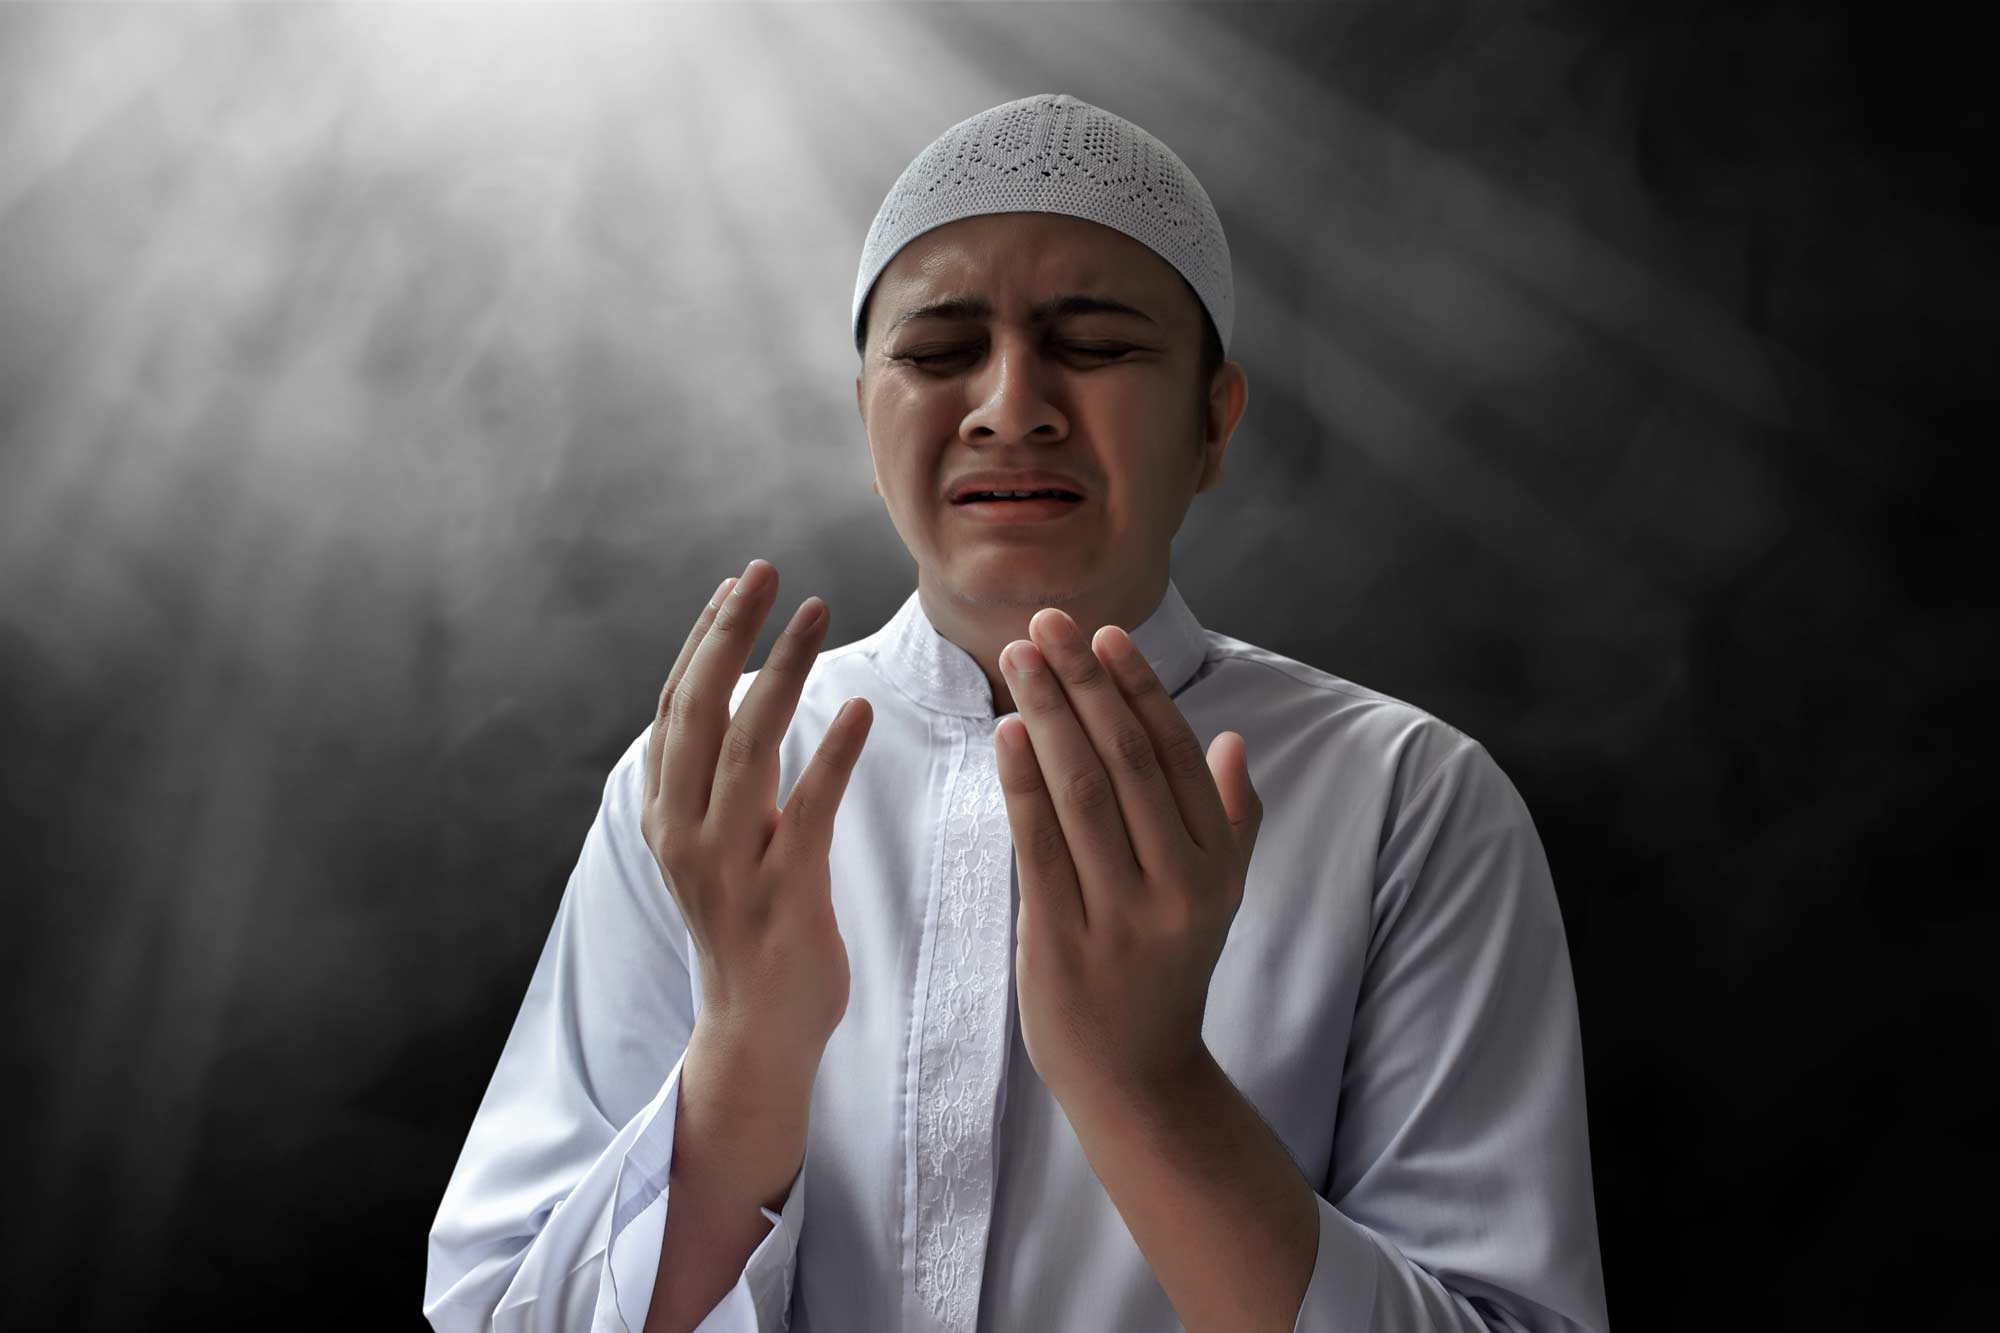 The Faster Way God Answers Dua – Ask Him in Distress